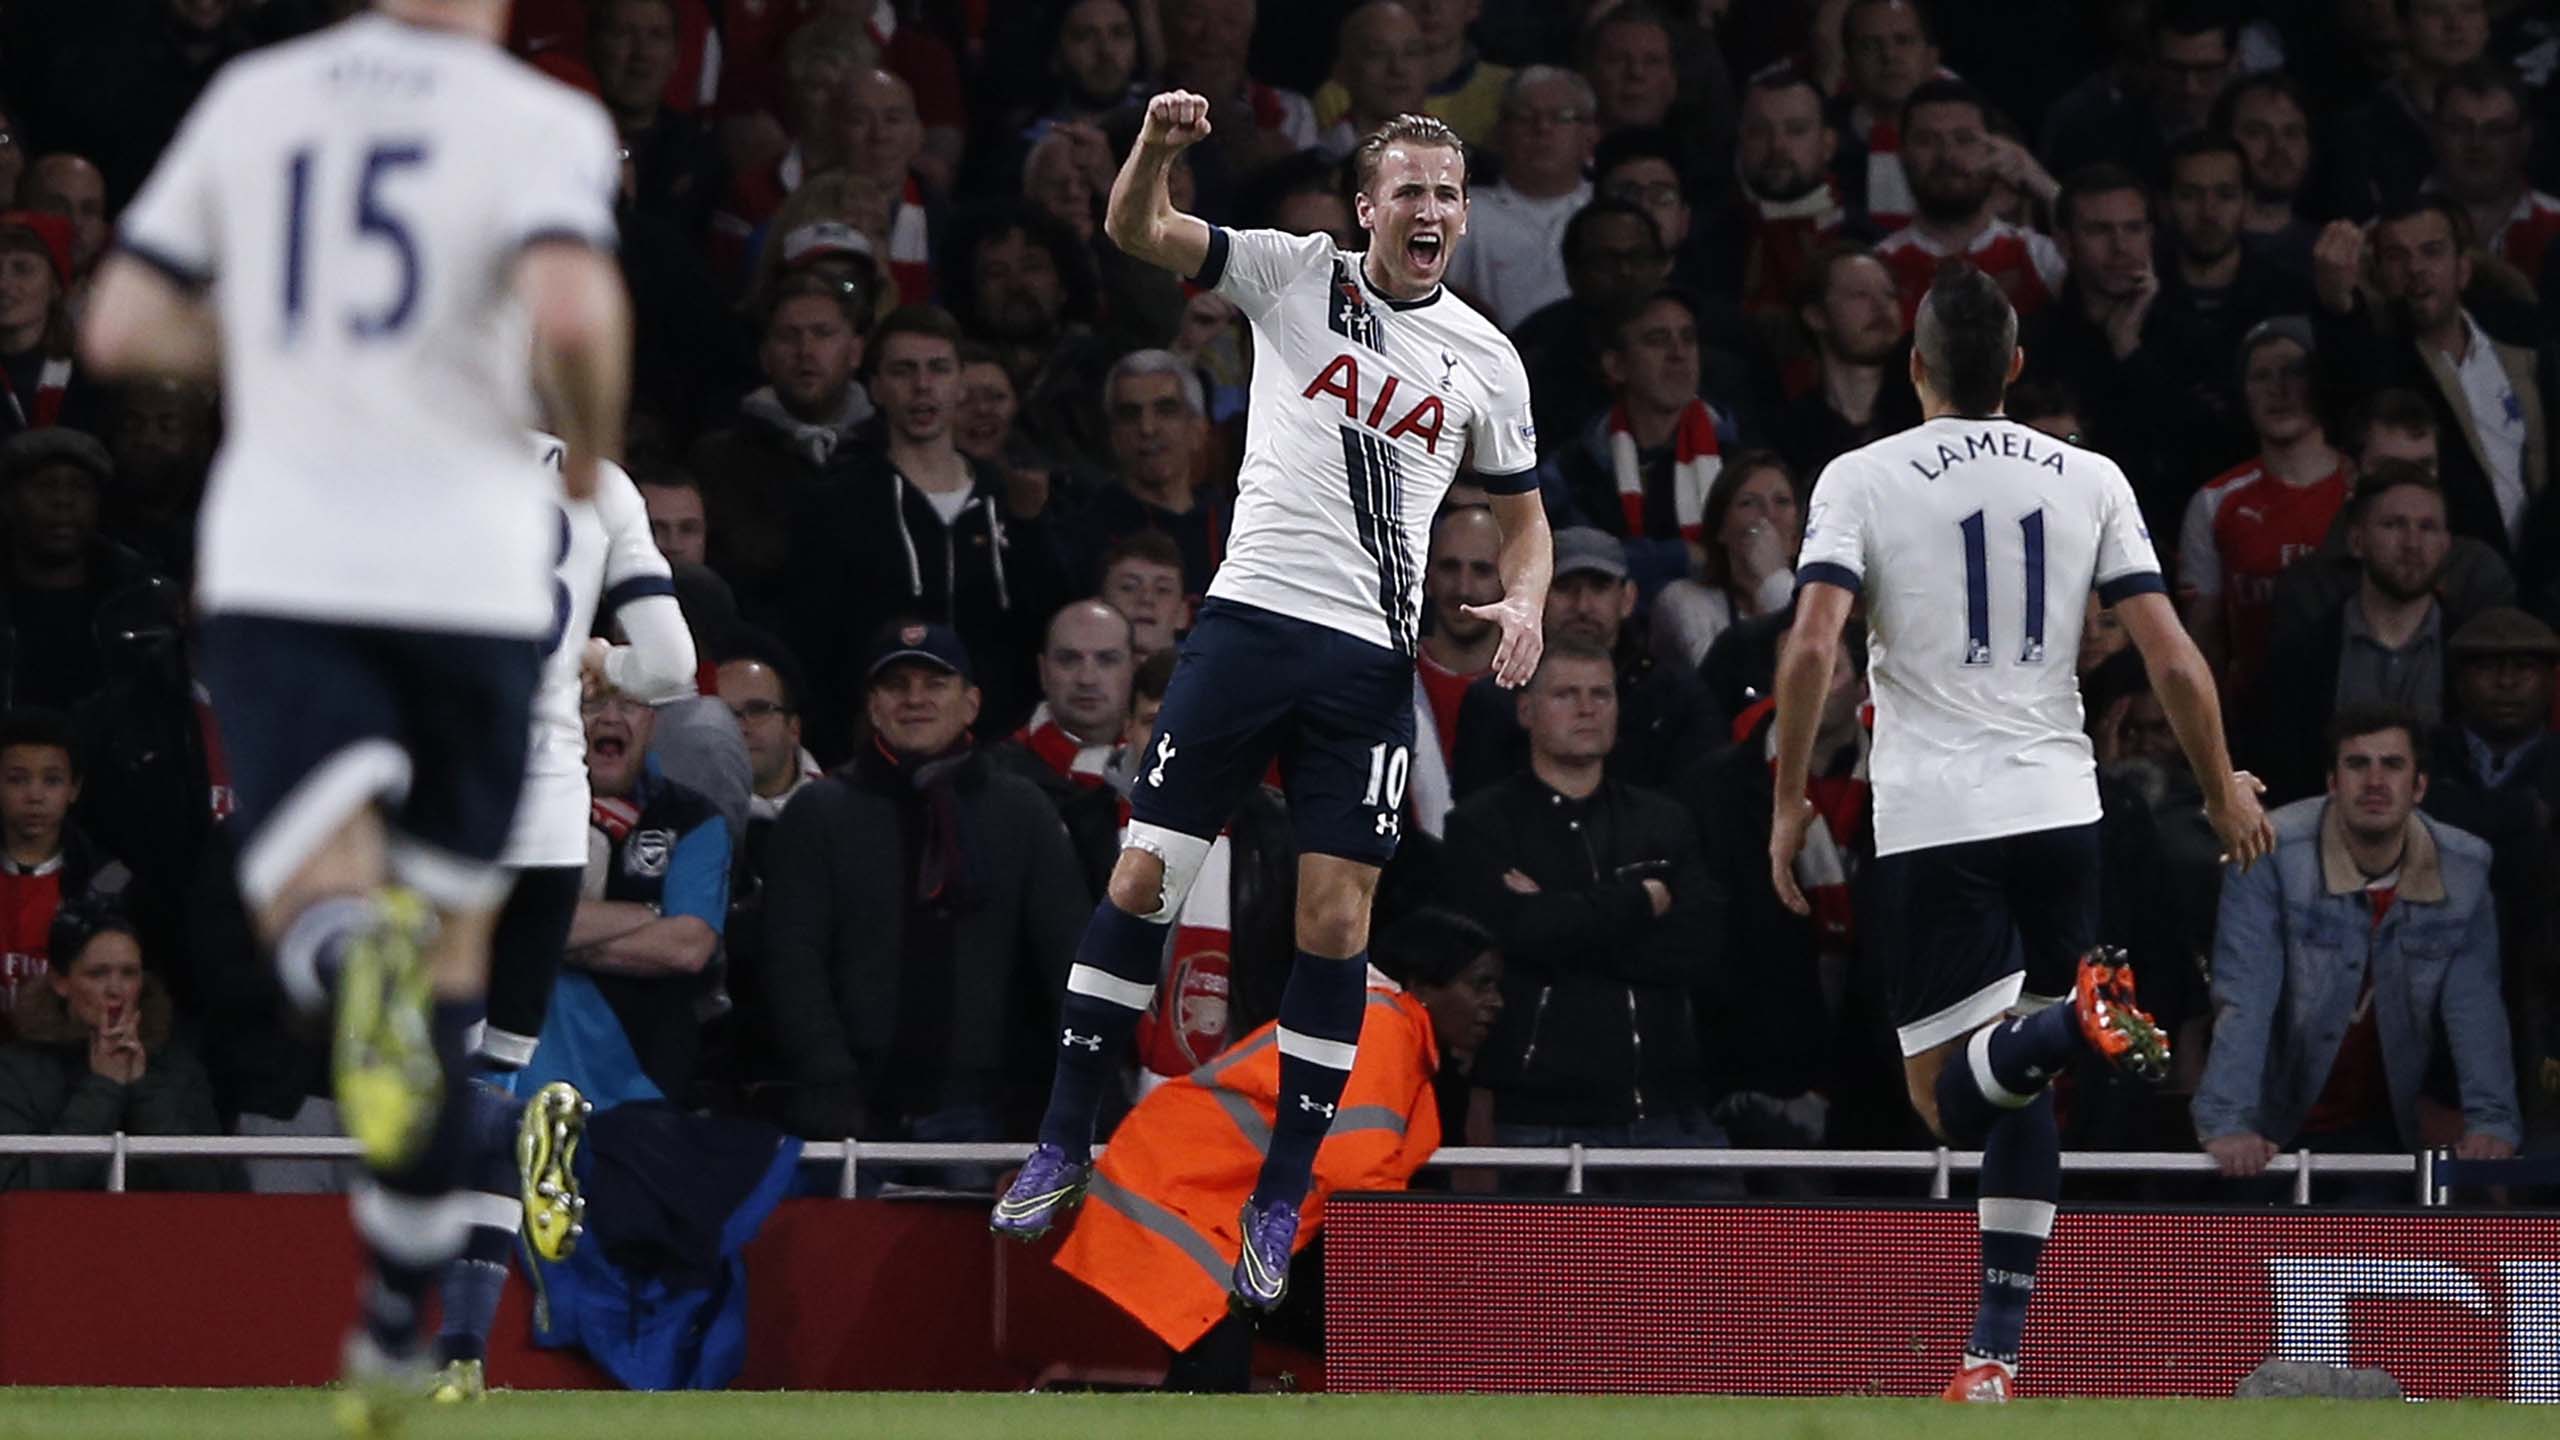 Harry Kane, Every North London Derby goal, The 𝙖𝙡𝙡-𝙩𝙞𝙢𝙚 𝙩𝙤𝙥  𝙨𝙘𝙤𝙧𝙚𝙧 in the Nort